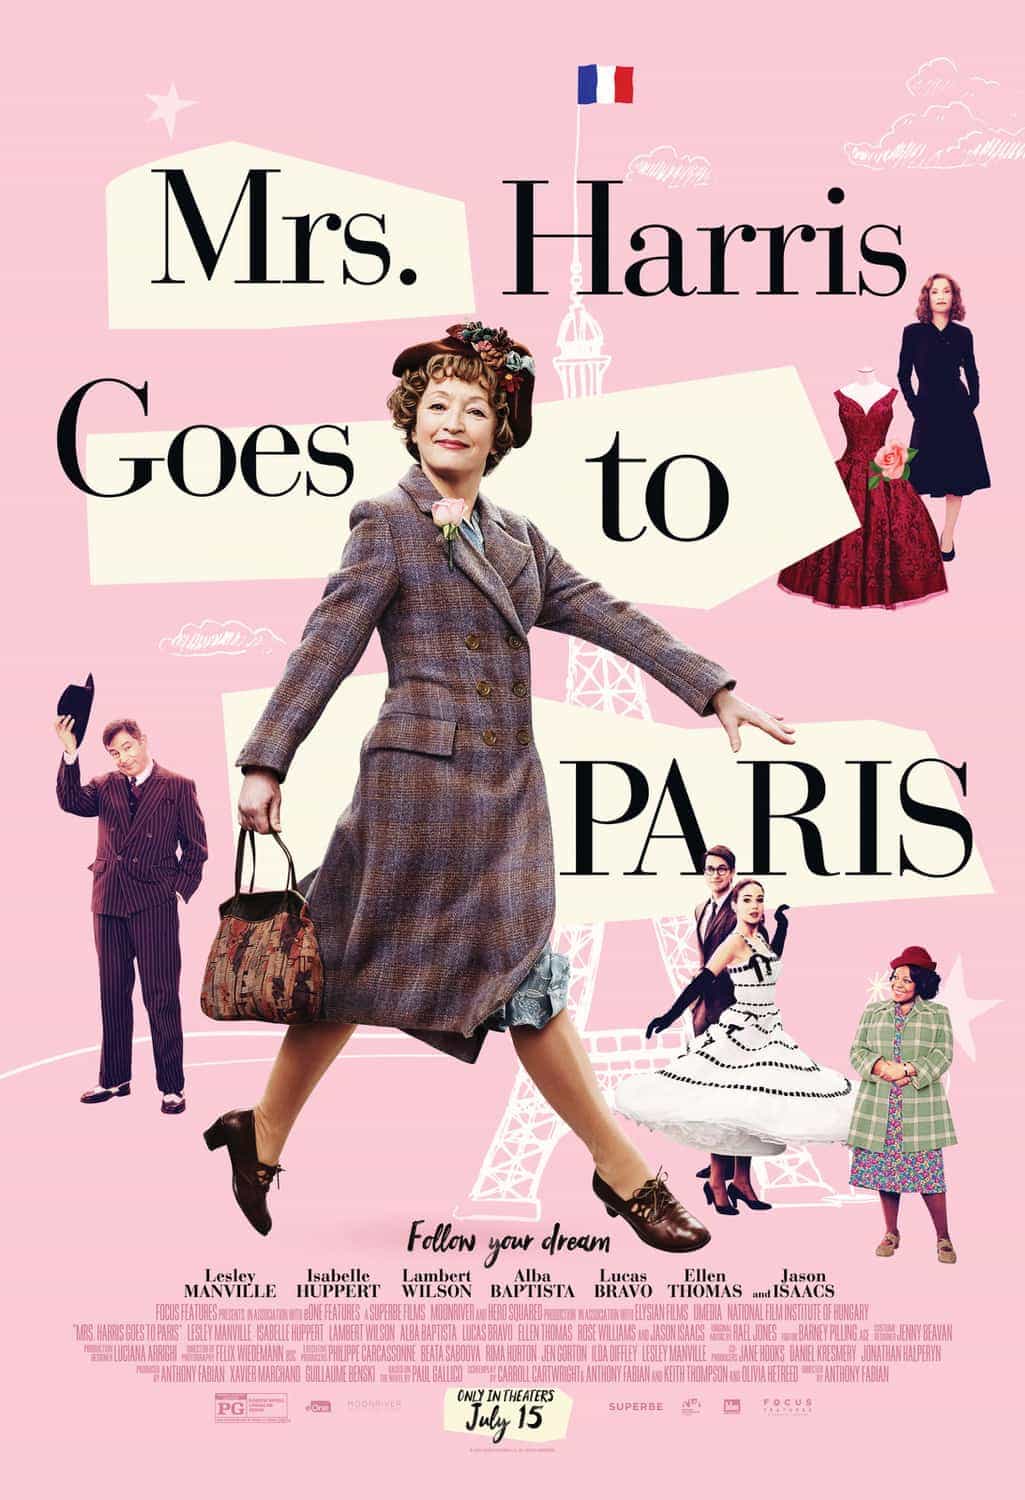 Mrs Harris Goes To Paris is given a PG rating in the UK for mild bad language